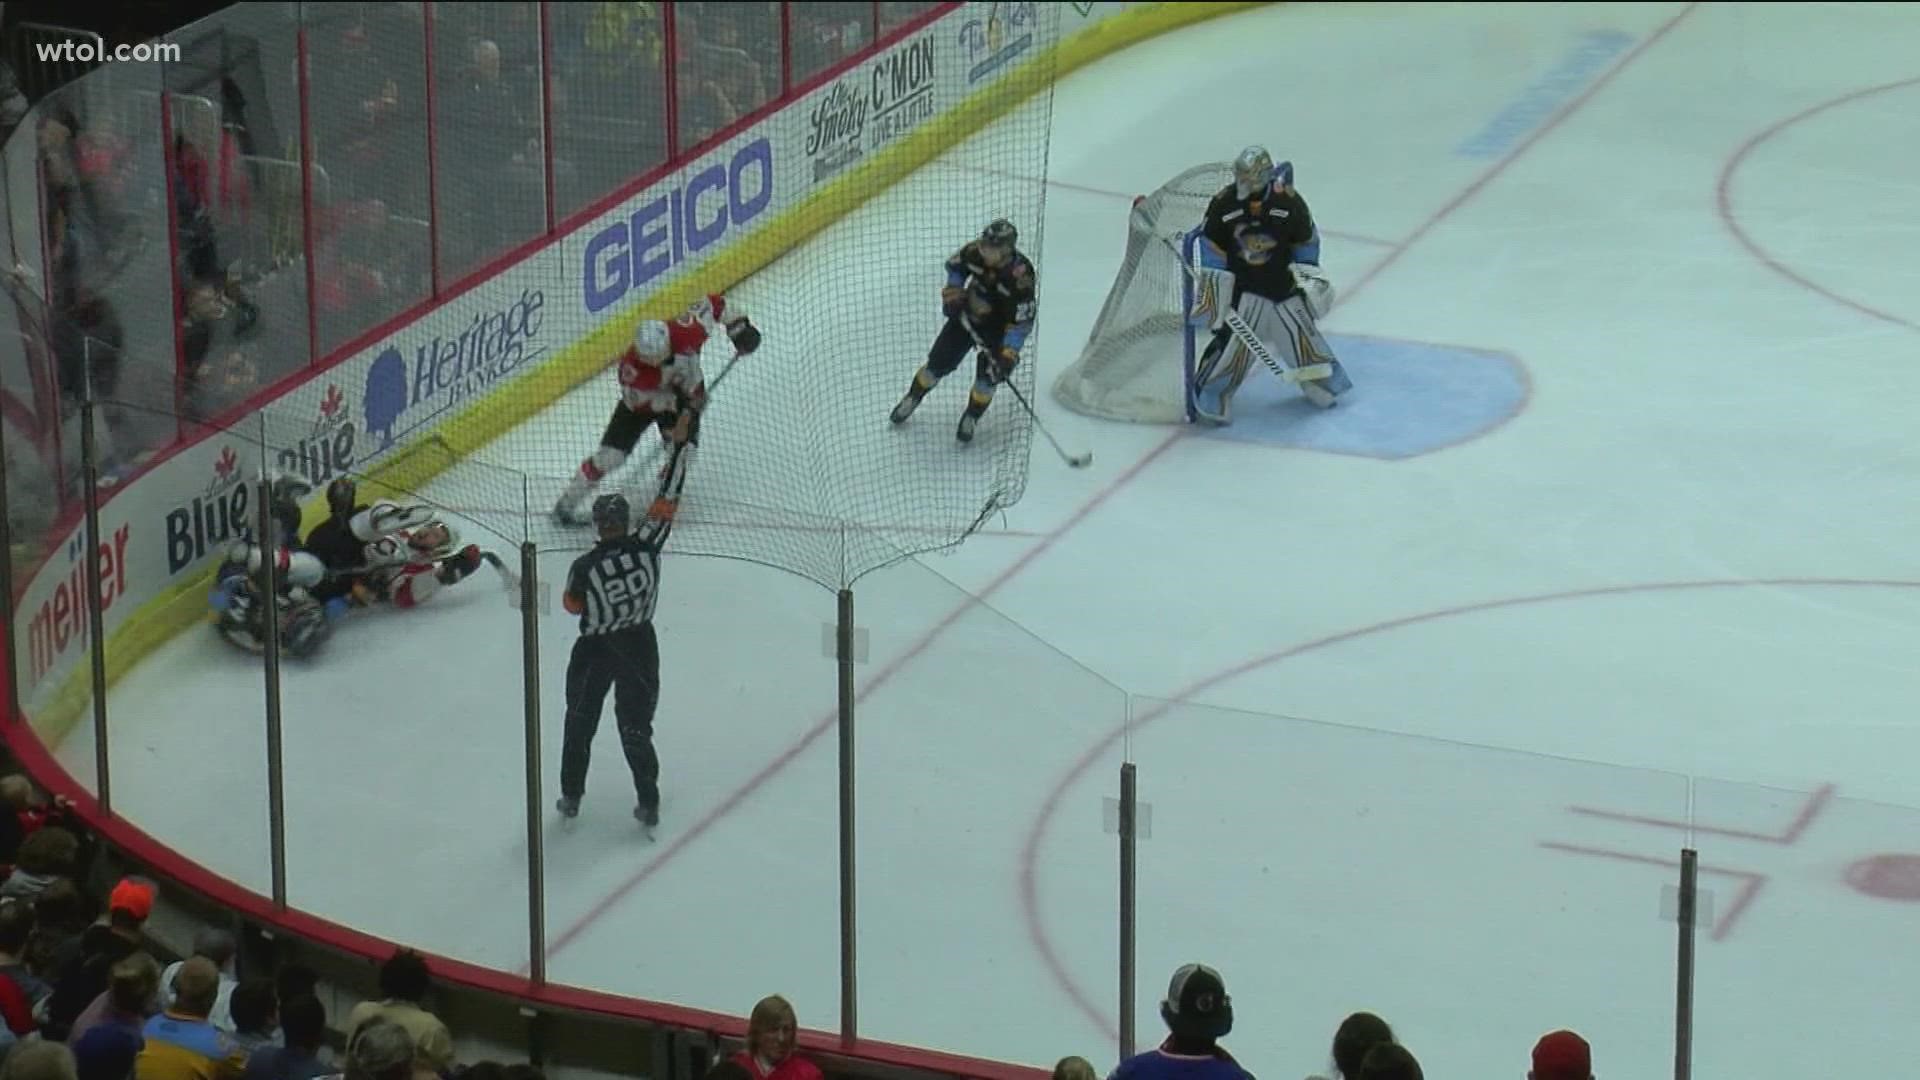 WTOL 11 Sports Director Jordan Strack breaks down two major penalty calls made in the Kelly Cup playoffs game that ECHL officials later said were ruled incorrectly.